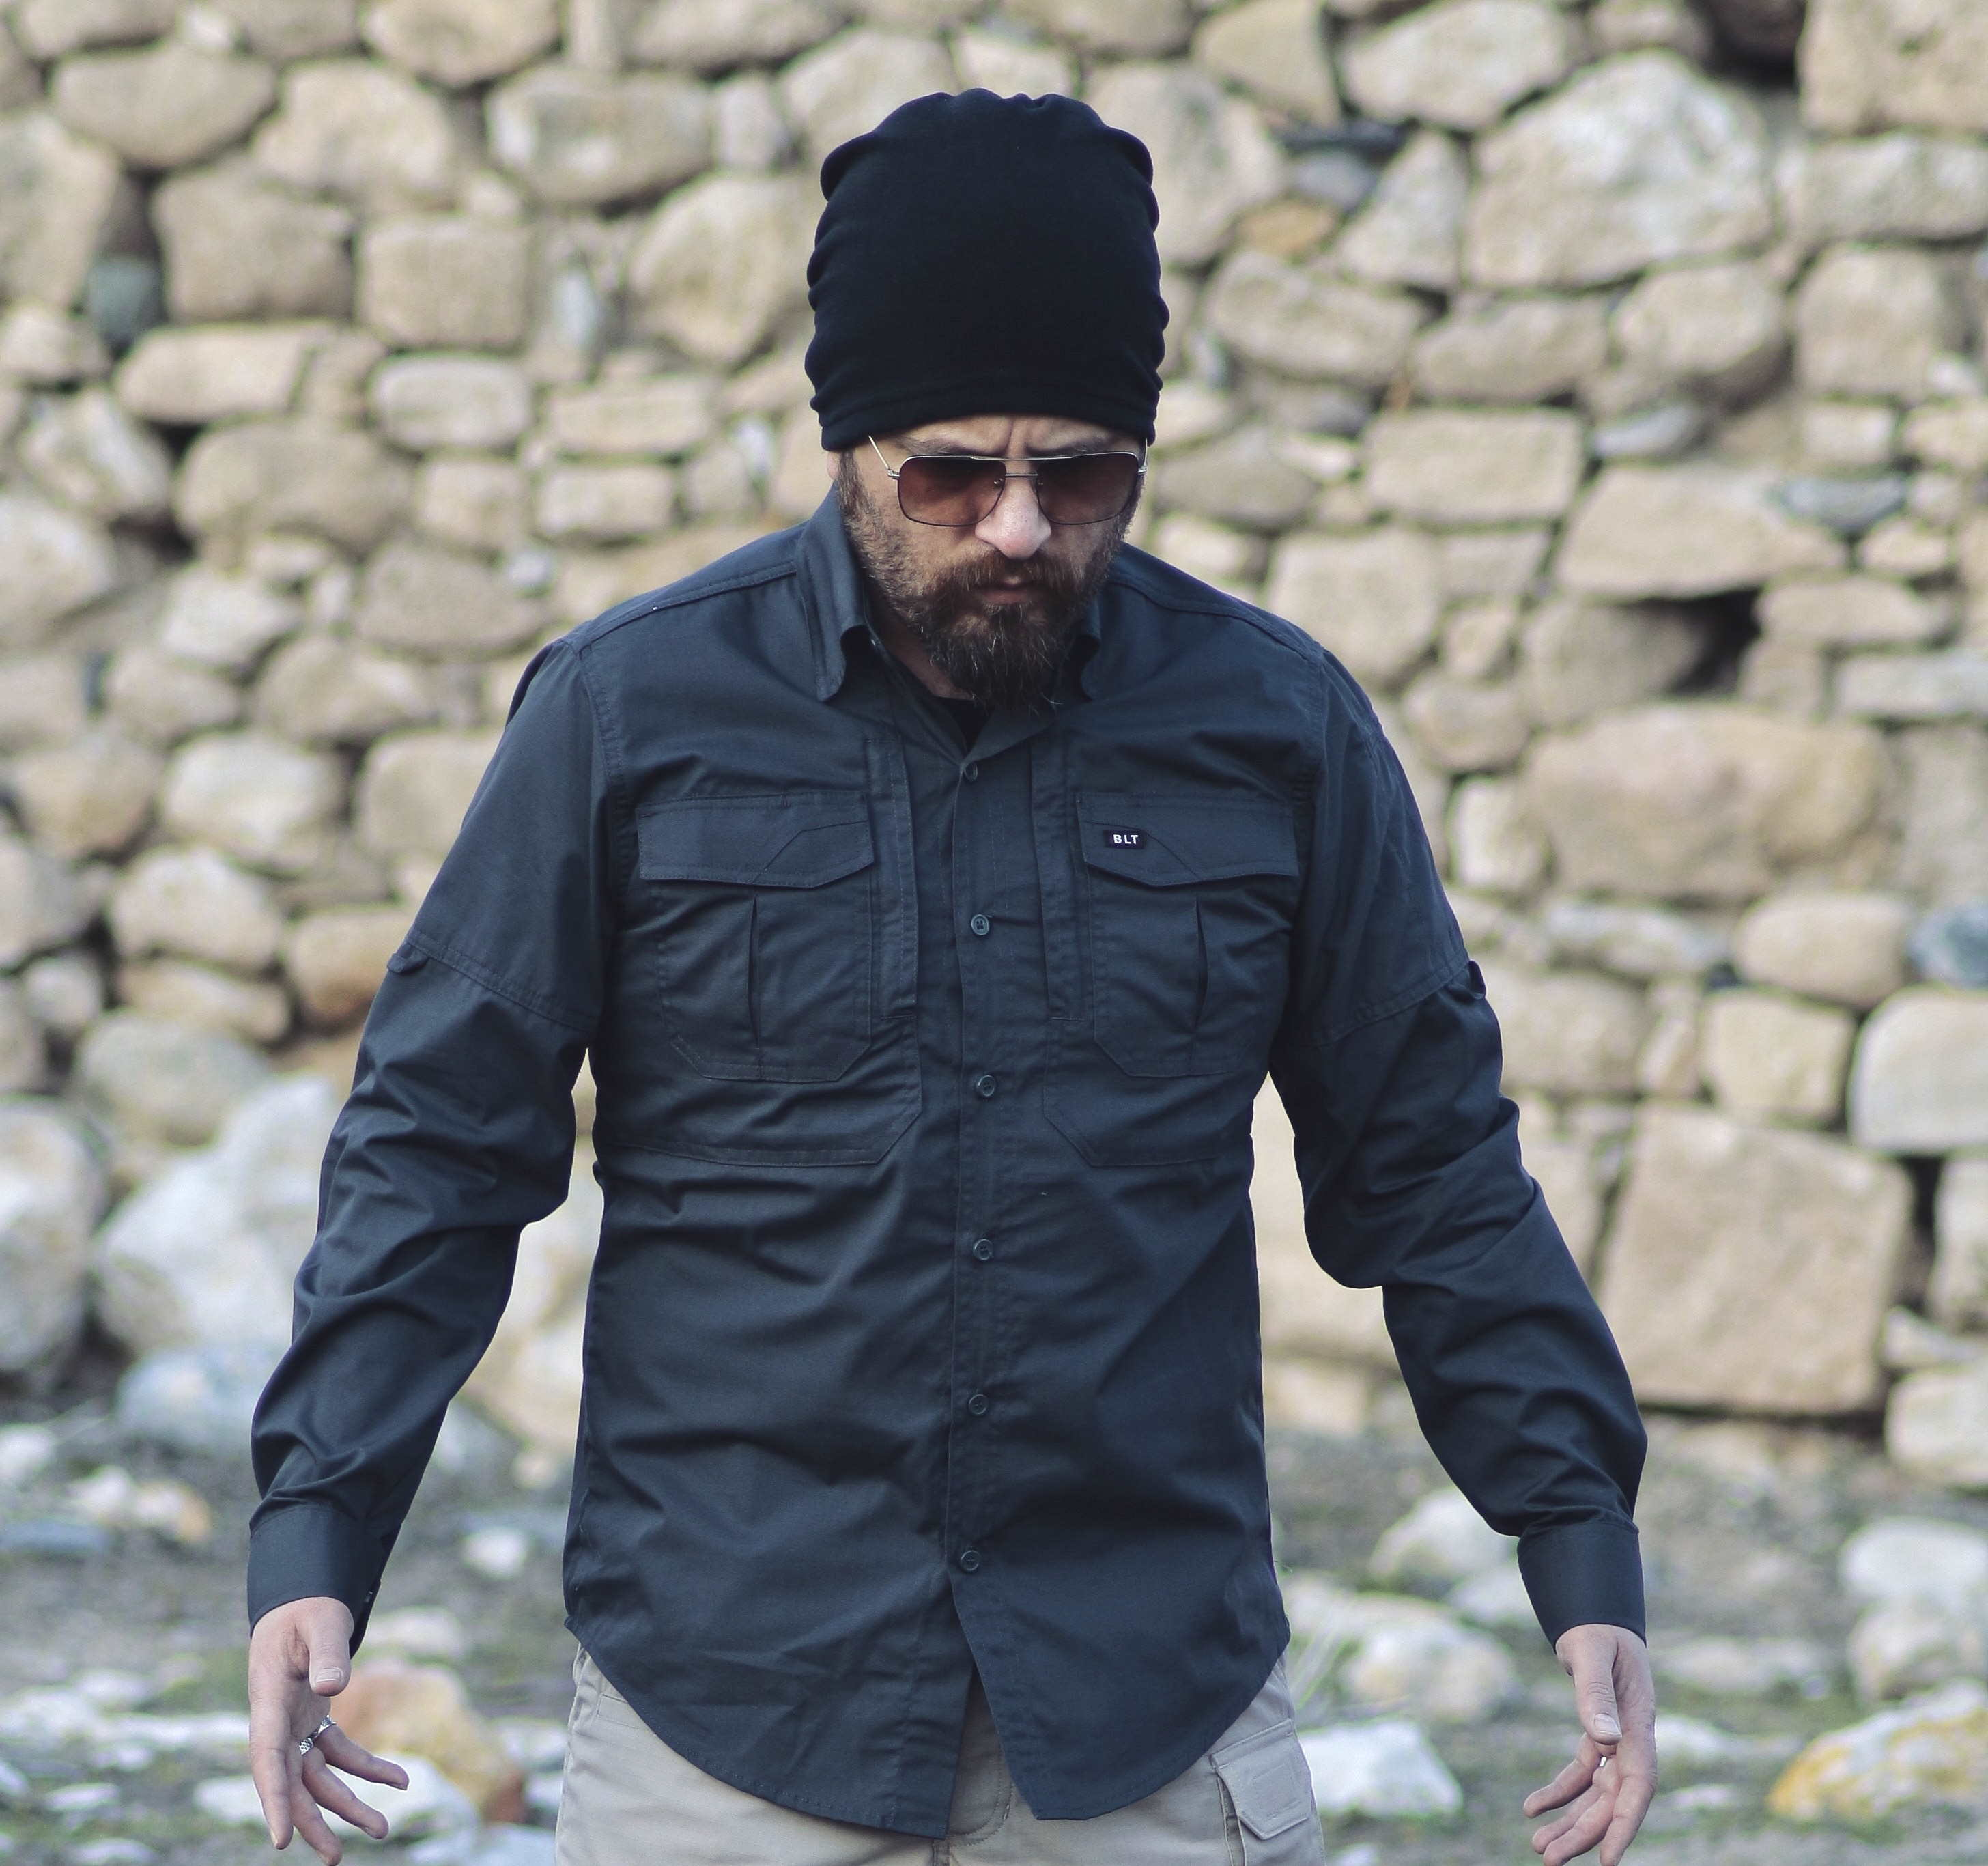 BLT ANTHRACITE (OUTDOOR) TACTICAL SHIRT